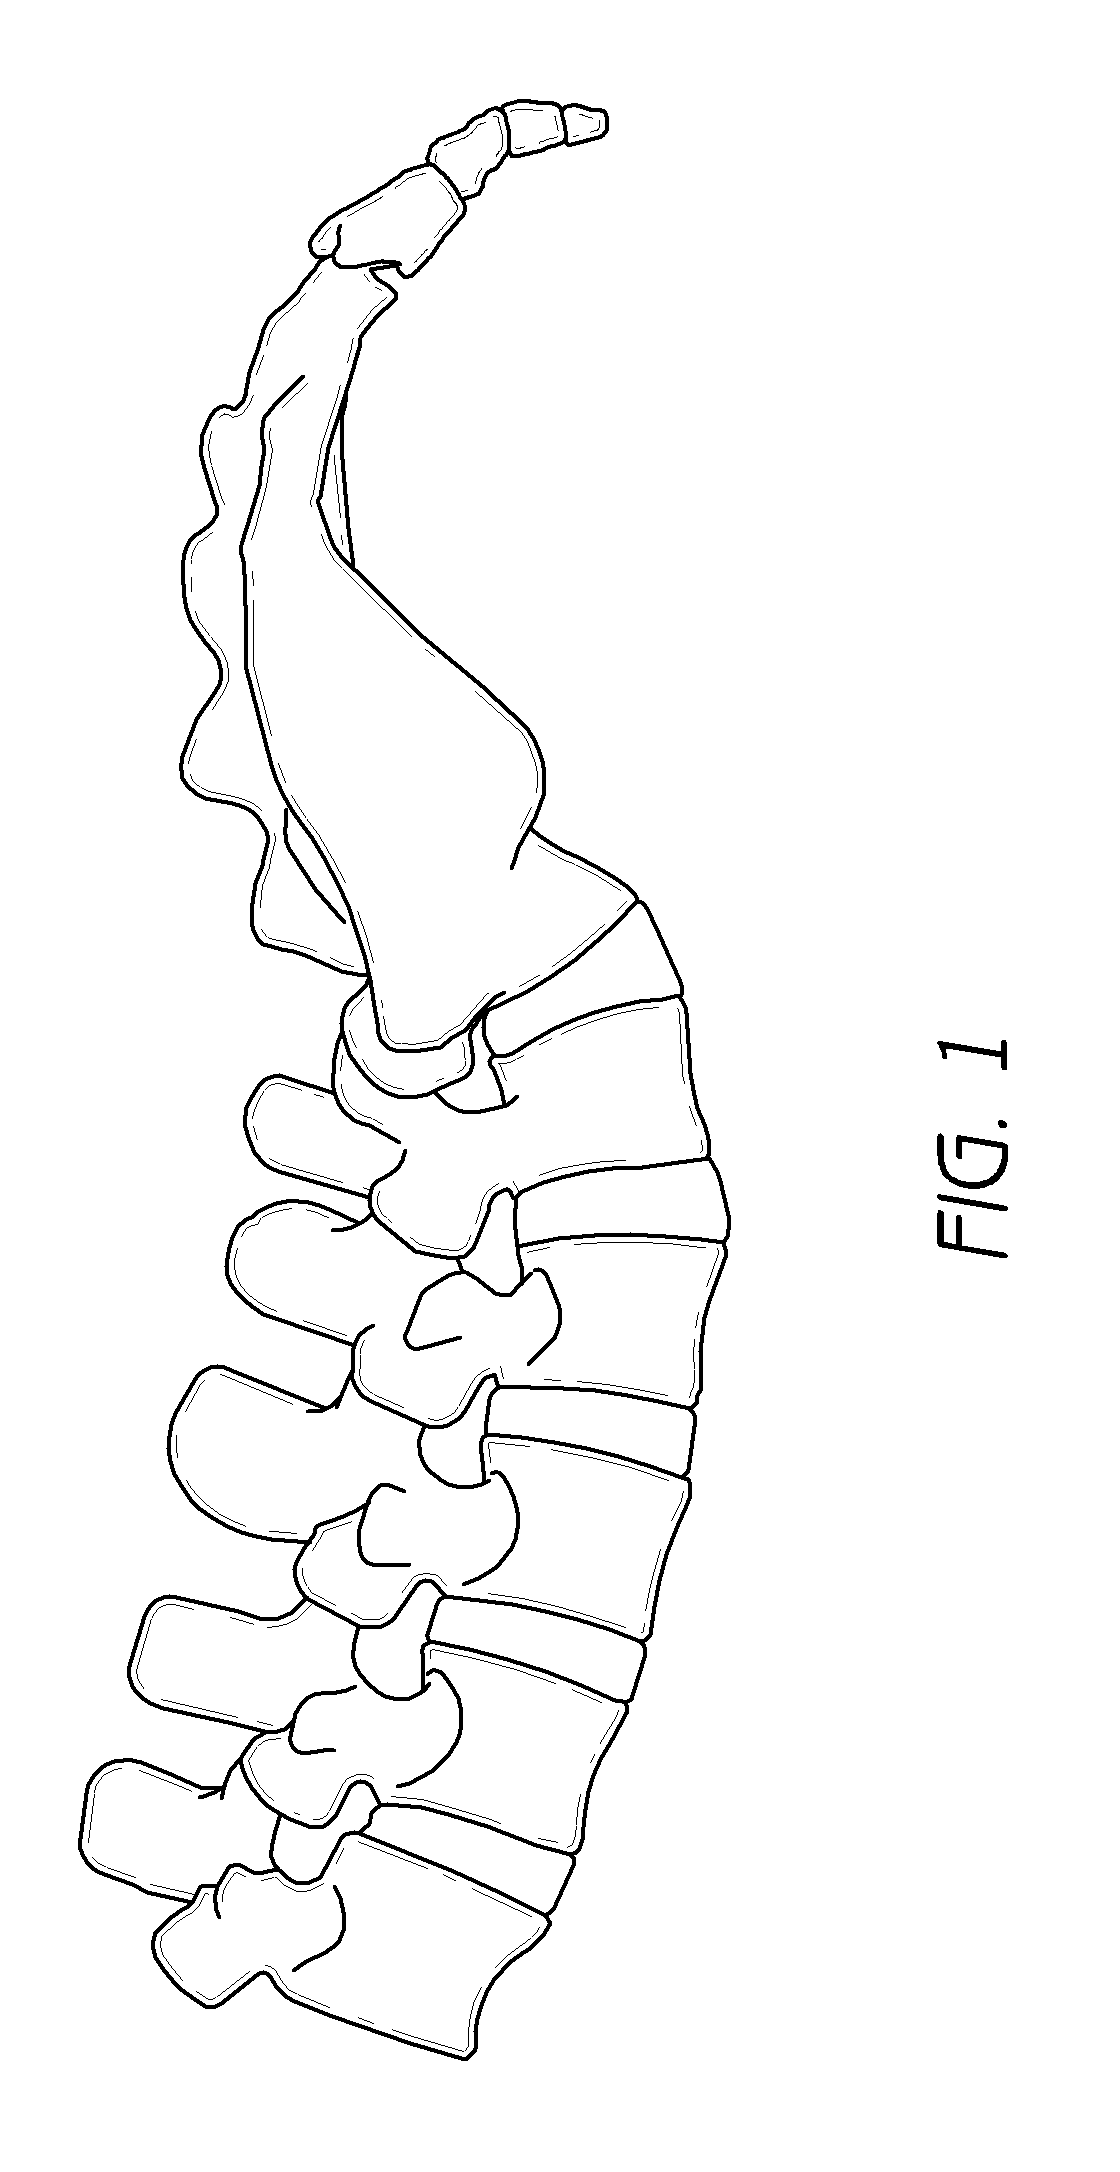 Spinous process spacer and implantation procedure